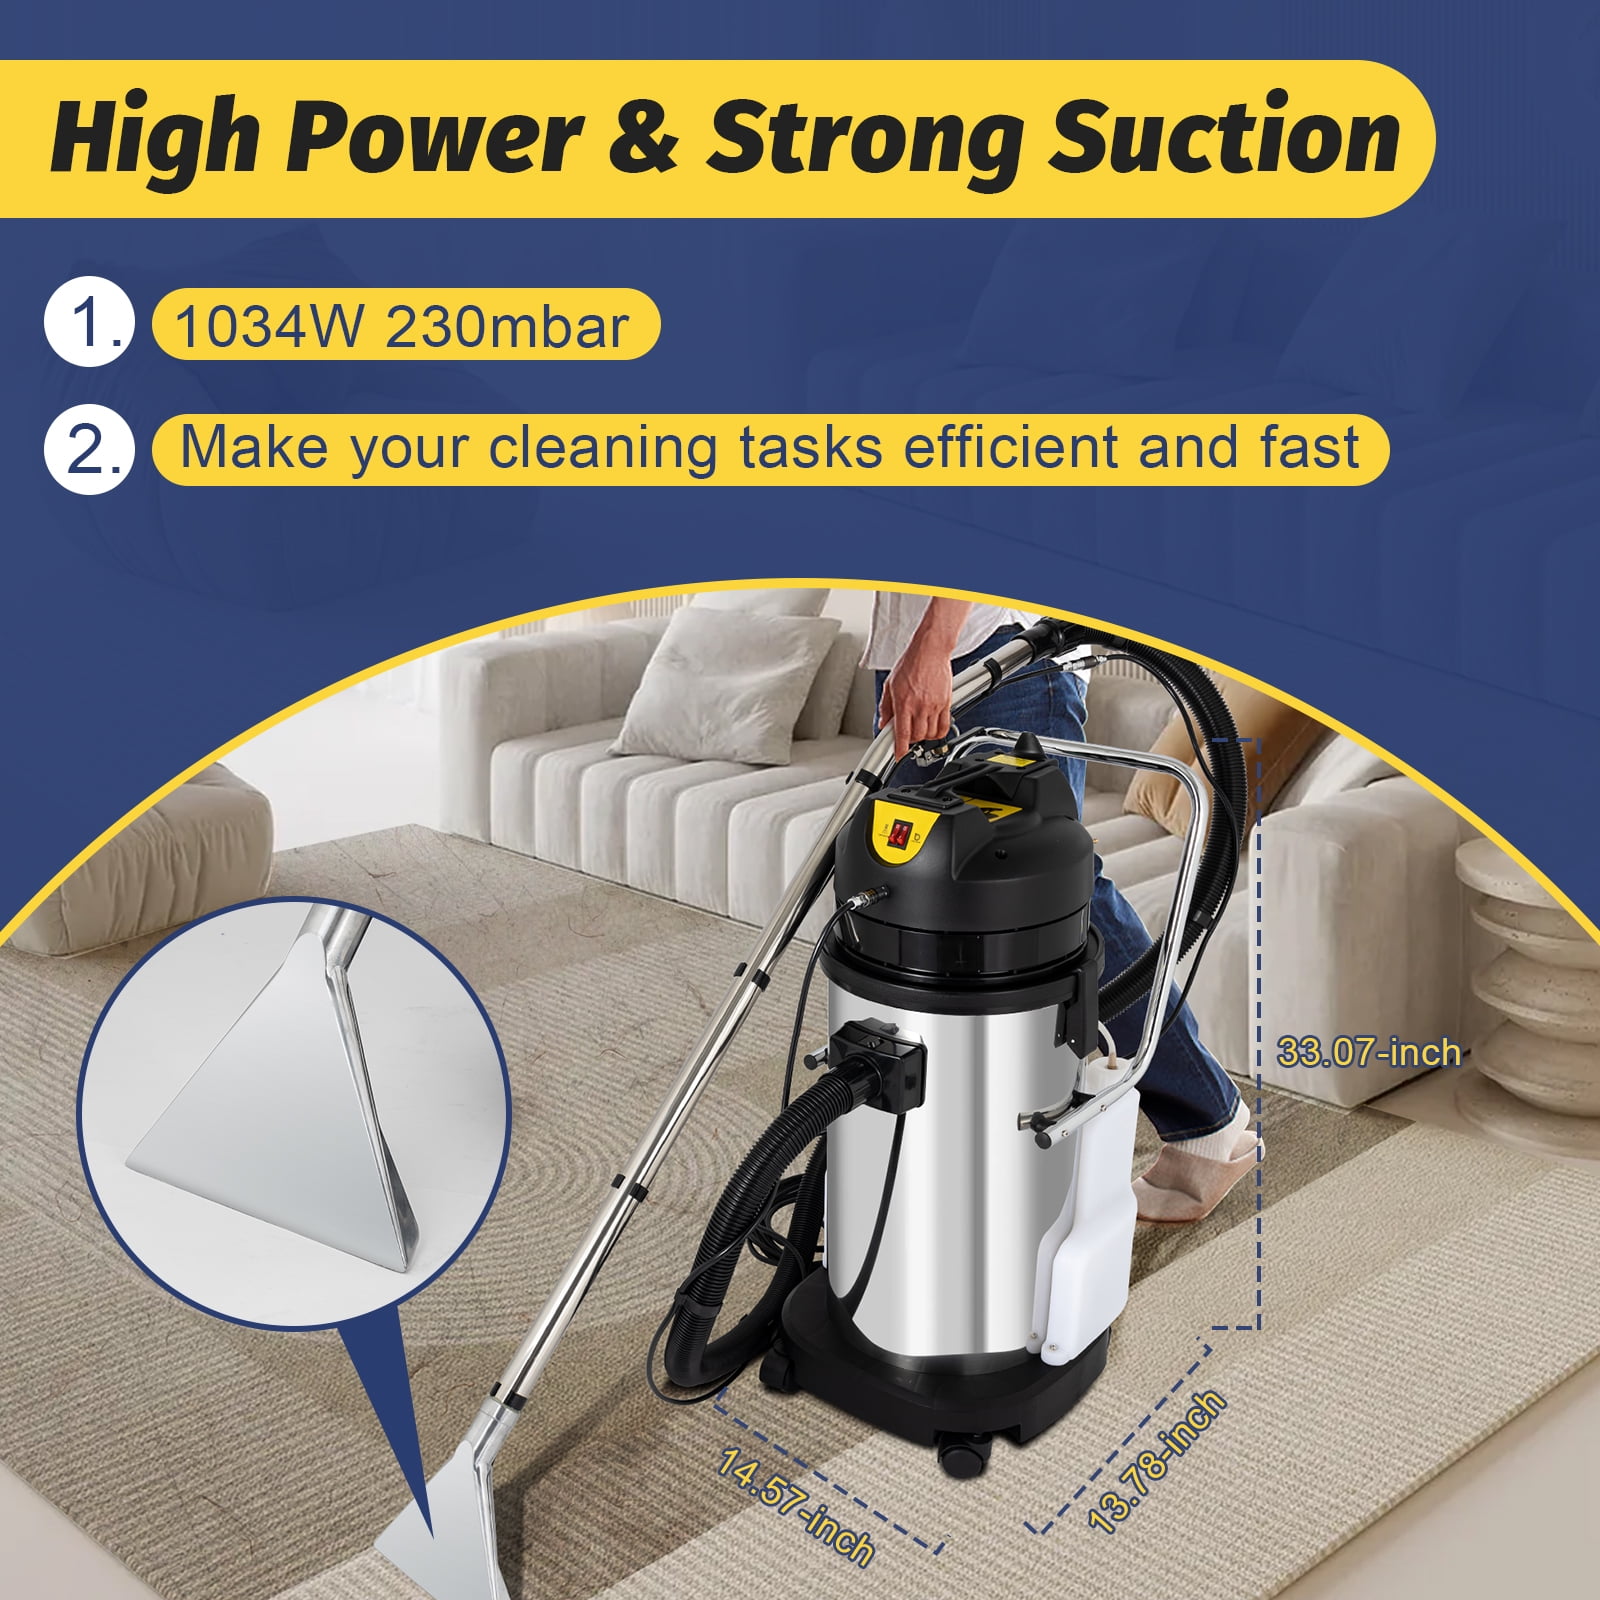 Techtongda 220V 40L/11Gal 3 in 1 Multifunctional Carpet Cleaner Extractor Cleaning Machine